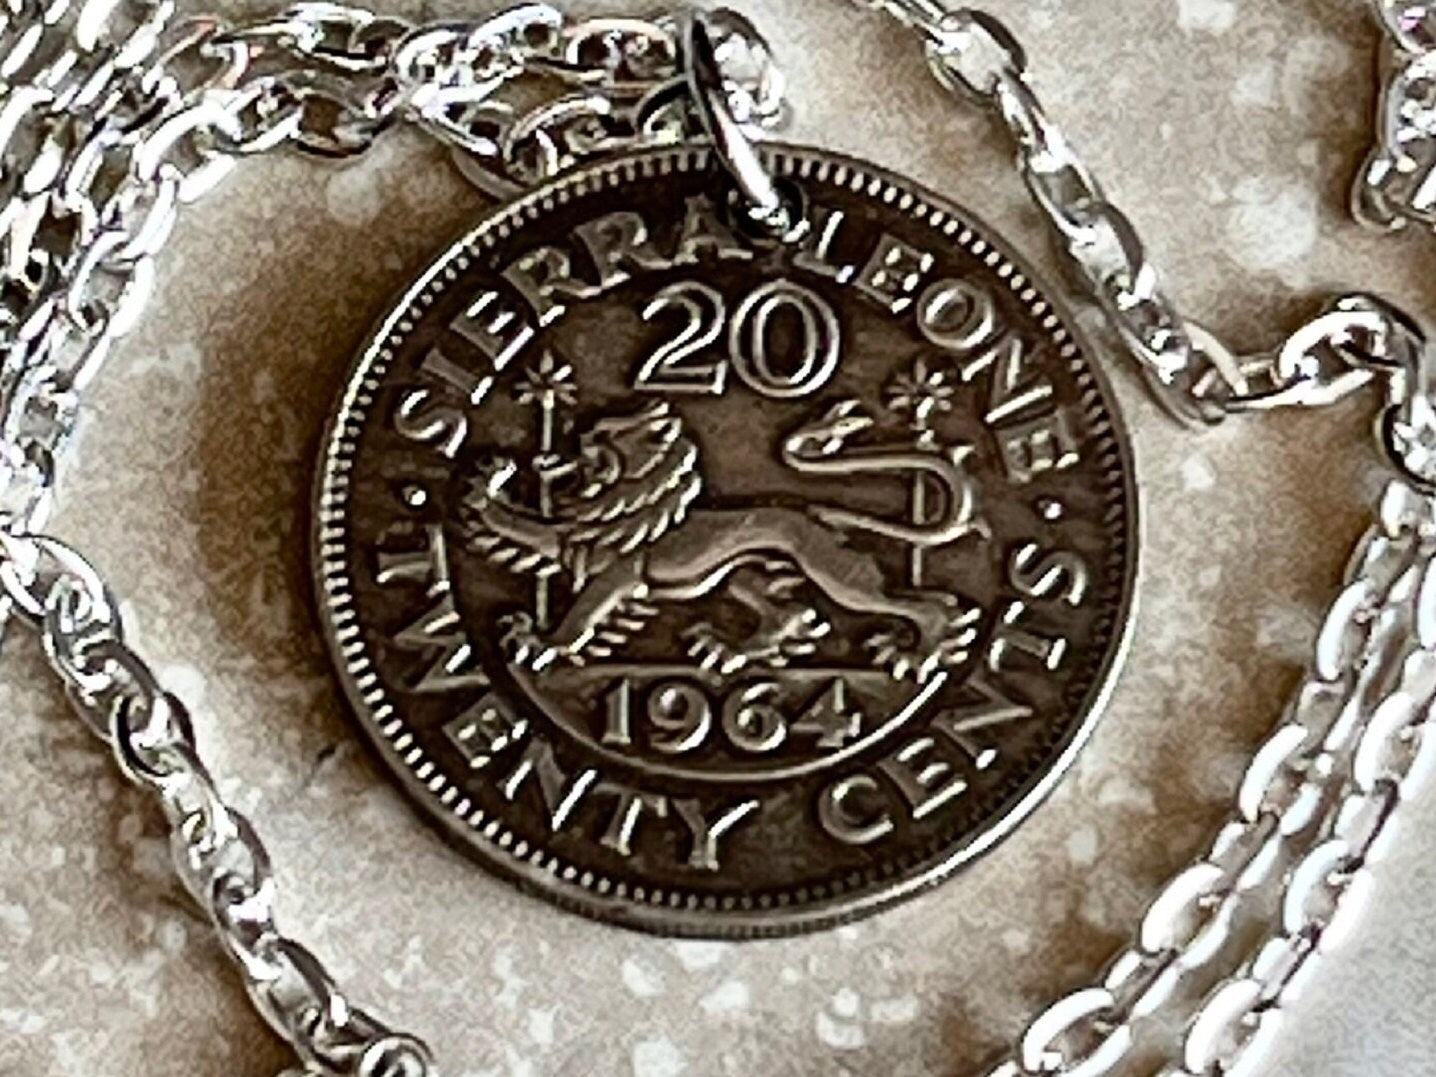 Sierra Leone Coin Pendant African 20 Cents Personal Necklace Vintage Handmade Jewelry Gift Friend Charm For Him Her World Coin Collector